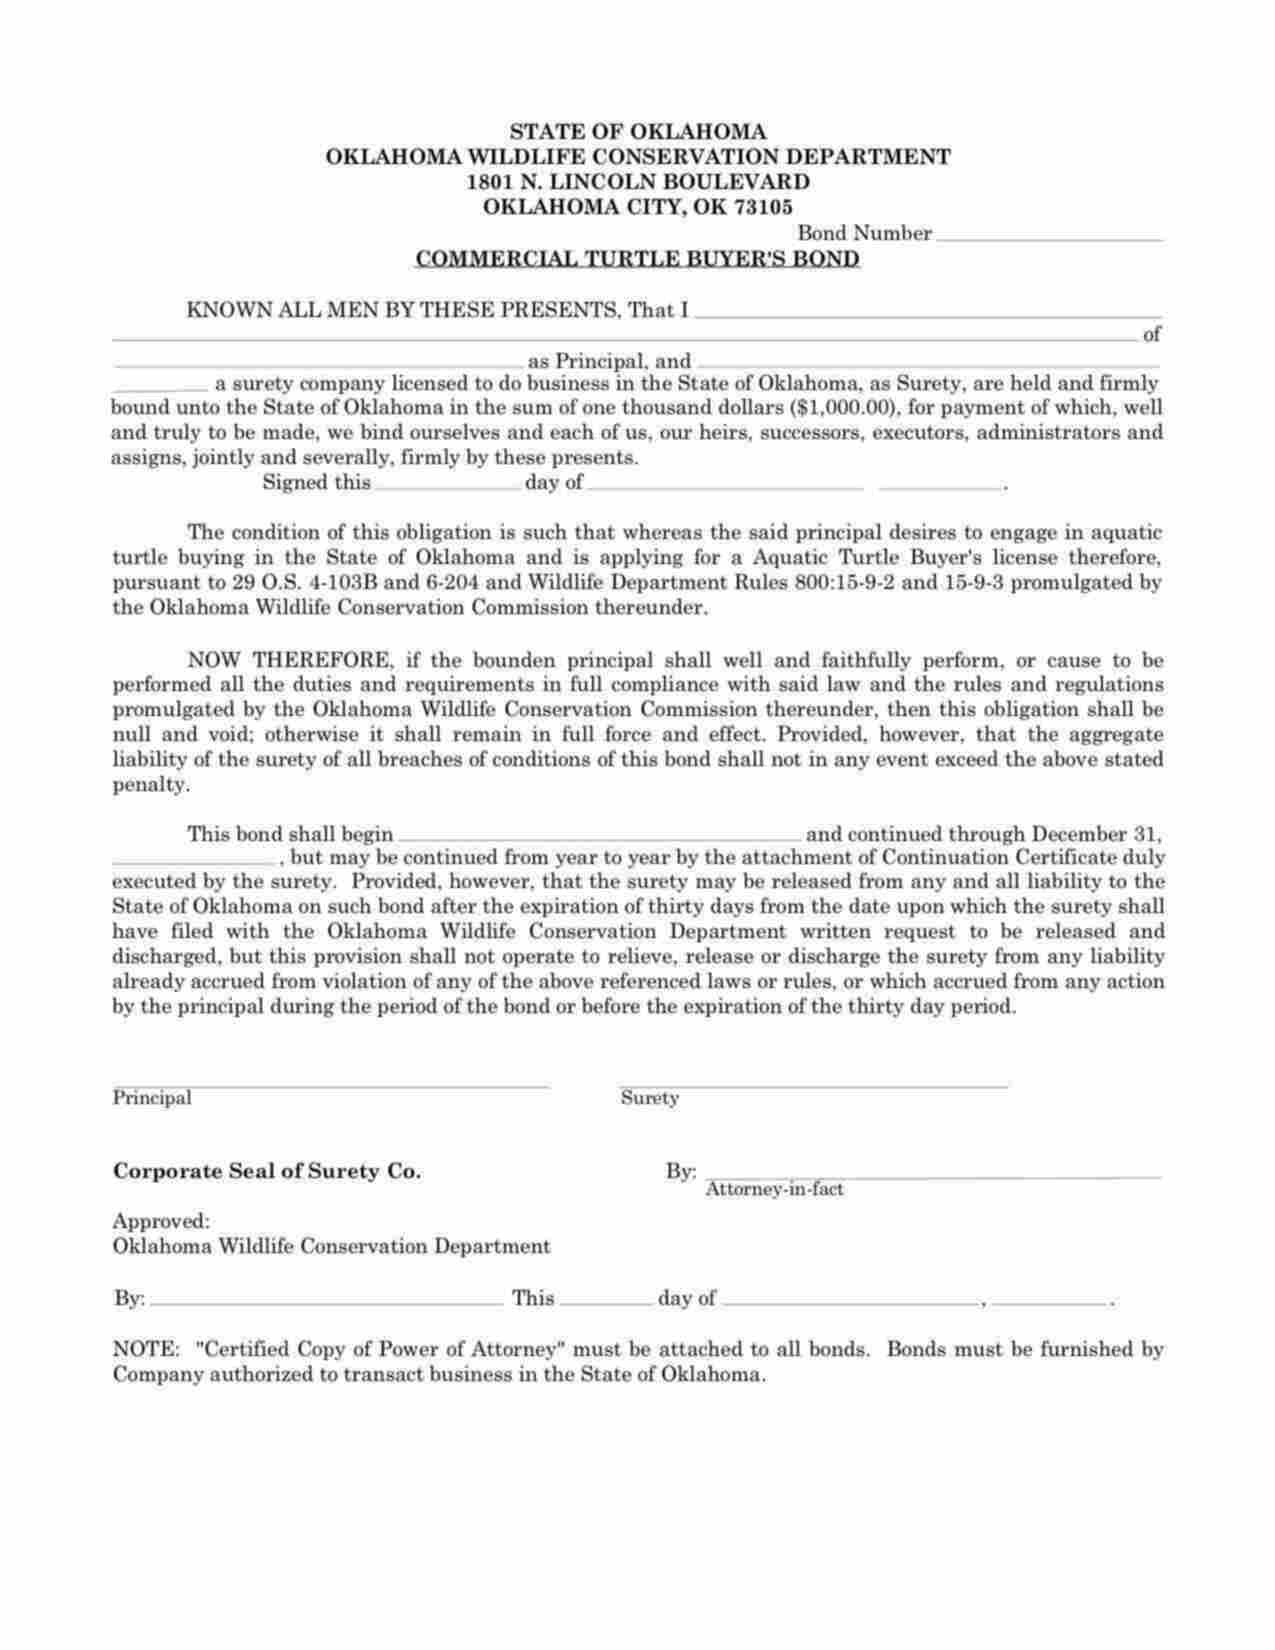 Oklahoma Commercial Turtle Buyer Bond Form